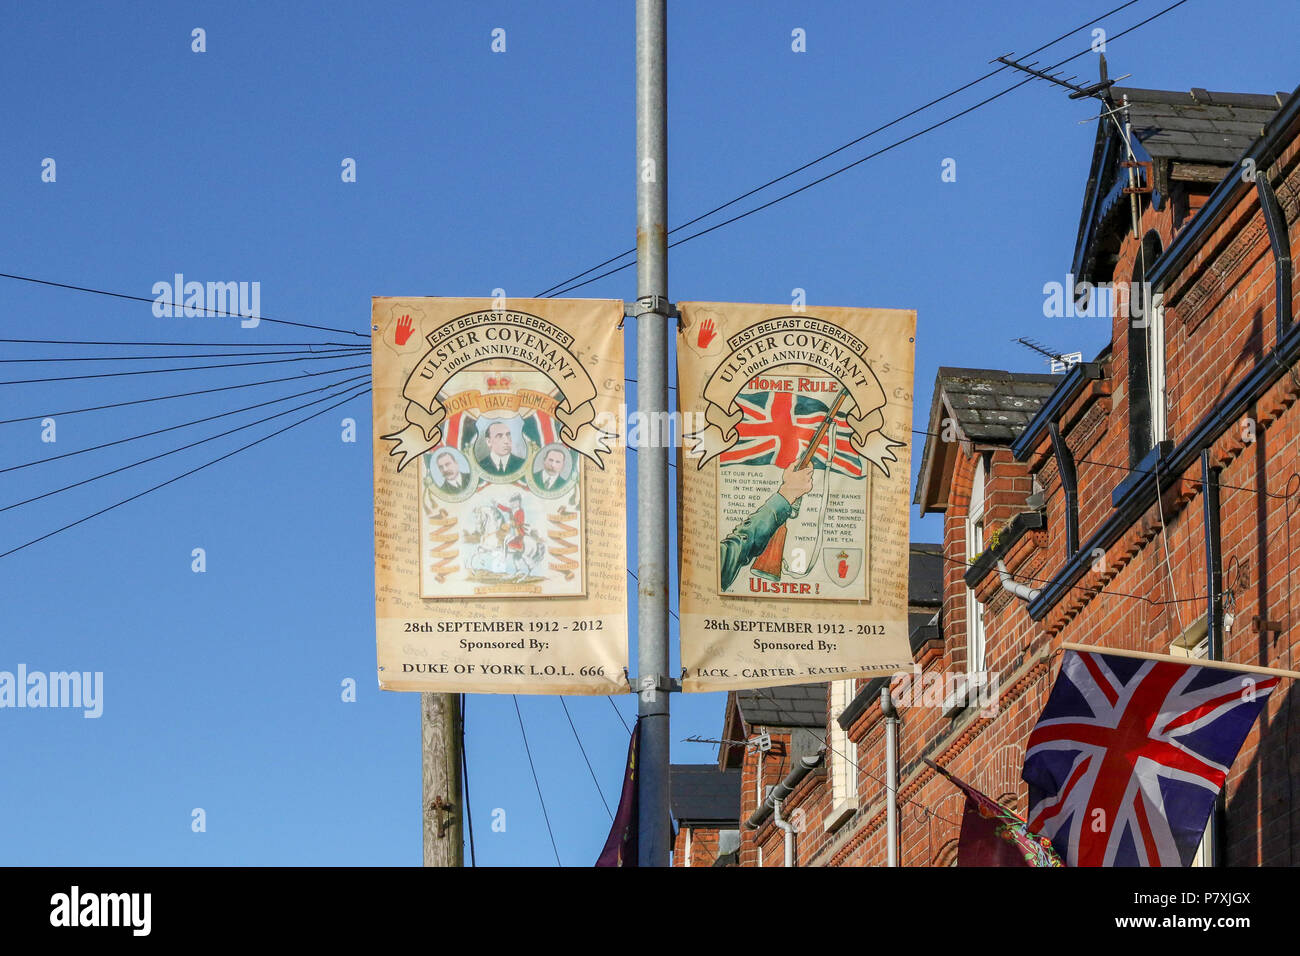 The Union jack and unionist signs relating to the Ulster Covenant signed in 1912. Stock Photo